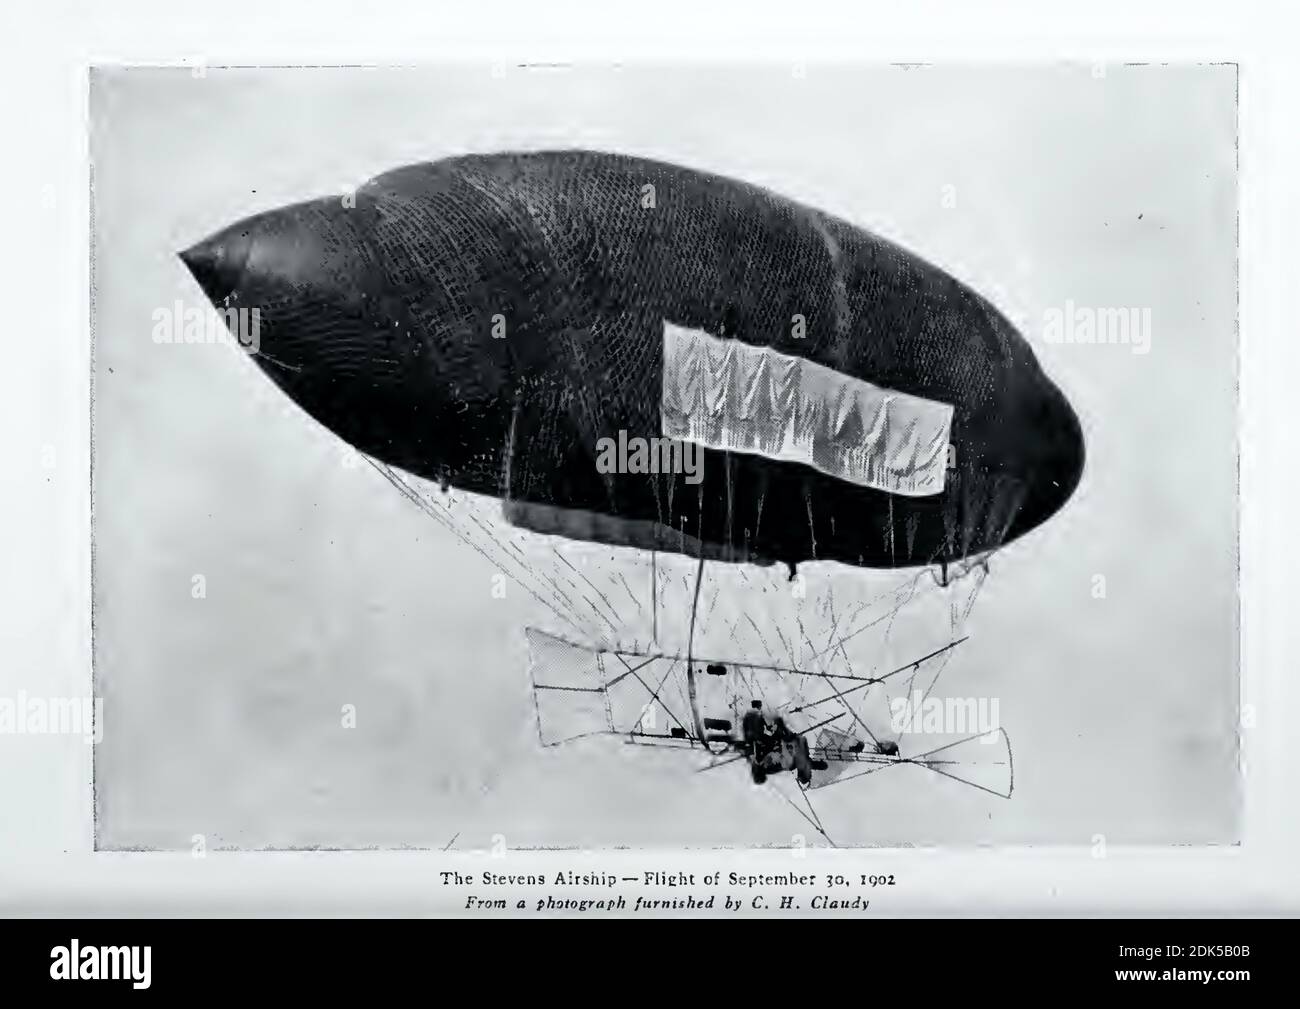 Vintage photograph of The Stevens Airship - Flight of September 30th 1902. Historic photograph from the early days of aviation. Stock Photo